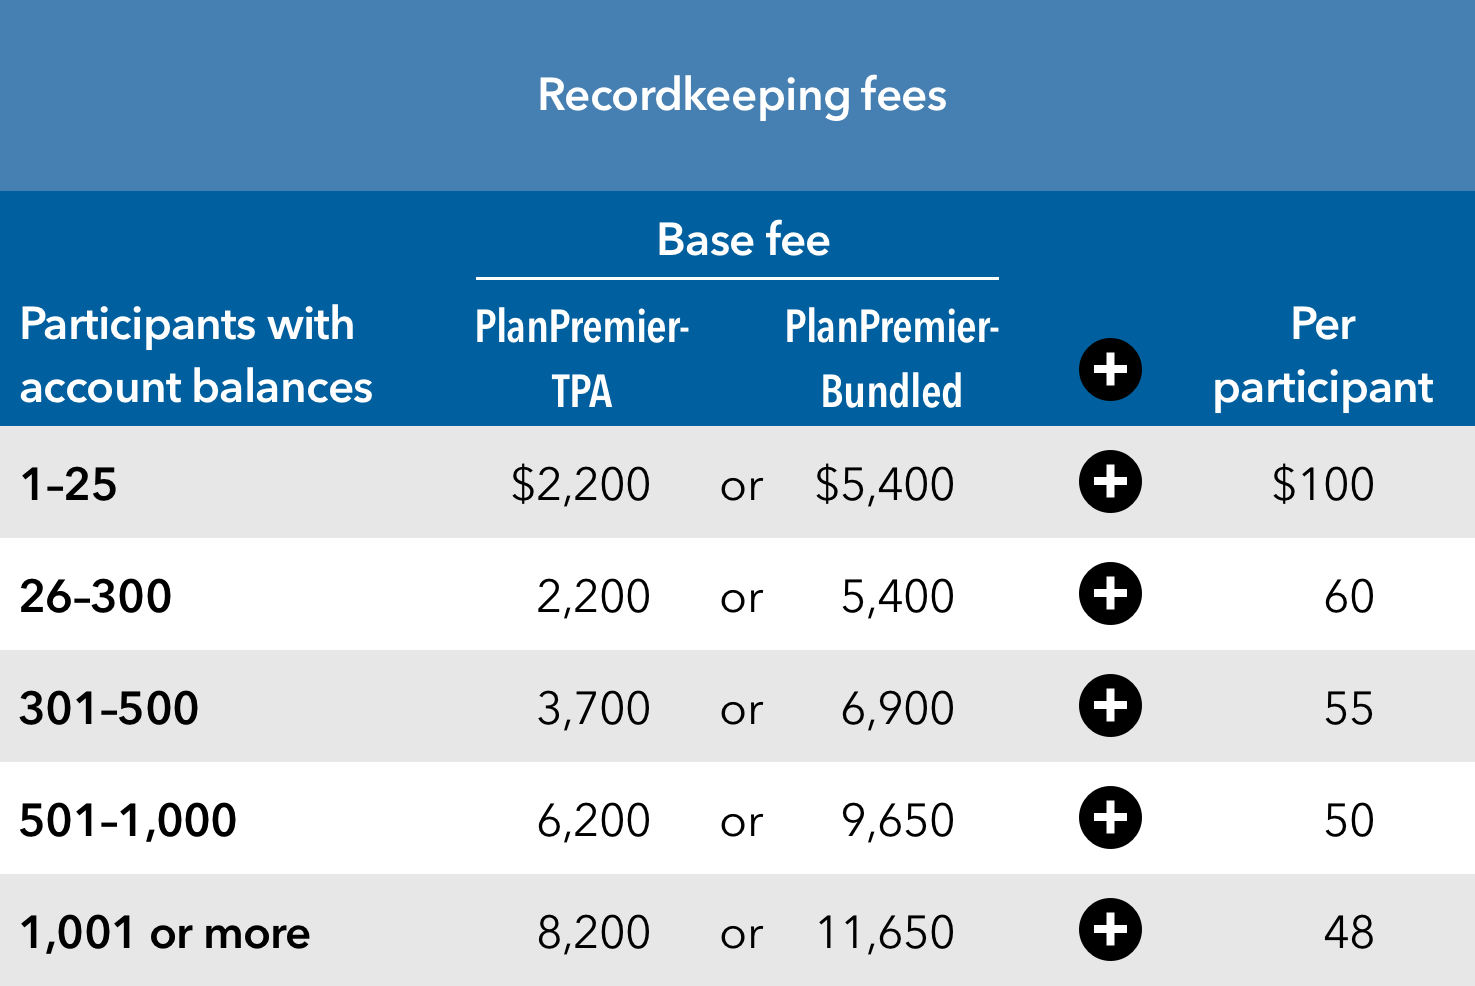 This chart displays how recordkeeping fees are determined. The first column shows the number of participants with account balances. The second and third columns display the base fee, dependent on whether it’s PlanPremier-TPA as shown in the second column, or PlanPremier-Bundled as shown in the third column. The fourth column lists the cost per participant. So, the base fee would be based on the total number of participants, plus another fee per participant. In this chart, the figures are as follows: For 1 to 25 participants with account balances, a base fee of $2,200 for PlanPremier-TPA or $5,400 for PlanPremier-Bundled plus $100 per participant would provide you with the total recordkeeping fee. For 26 to 300 participants with account balances, a base fee of $2,200 for PlanPremier-TPA or $5,400 for PlanPremier-Bundled plus $60 per participant would provide you with the total recordkeeping fee.  For 301 to 500 participants with account balances, a base fee of $3,700 for PlanPremier-TPA or $6,900 for PlanPremier-Bundled plus $55 per participant would provide you with the total recordkeeping fee. For 501 to 1000 participants with account balances, a base fee of $6,200 for PlanPremier-TPA or $9,650 for PlanPremier-Bundled plus $50 per participant would provide you with the total recordkeeping fee. For 1,001 or more participants with account balances, a base fee of $8,200 for PlanPremier-TPA or $11,650 for PlanPremier-Bundled plus $48 per participant would provide you with the total recordkeeping fee. 